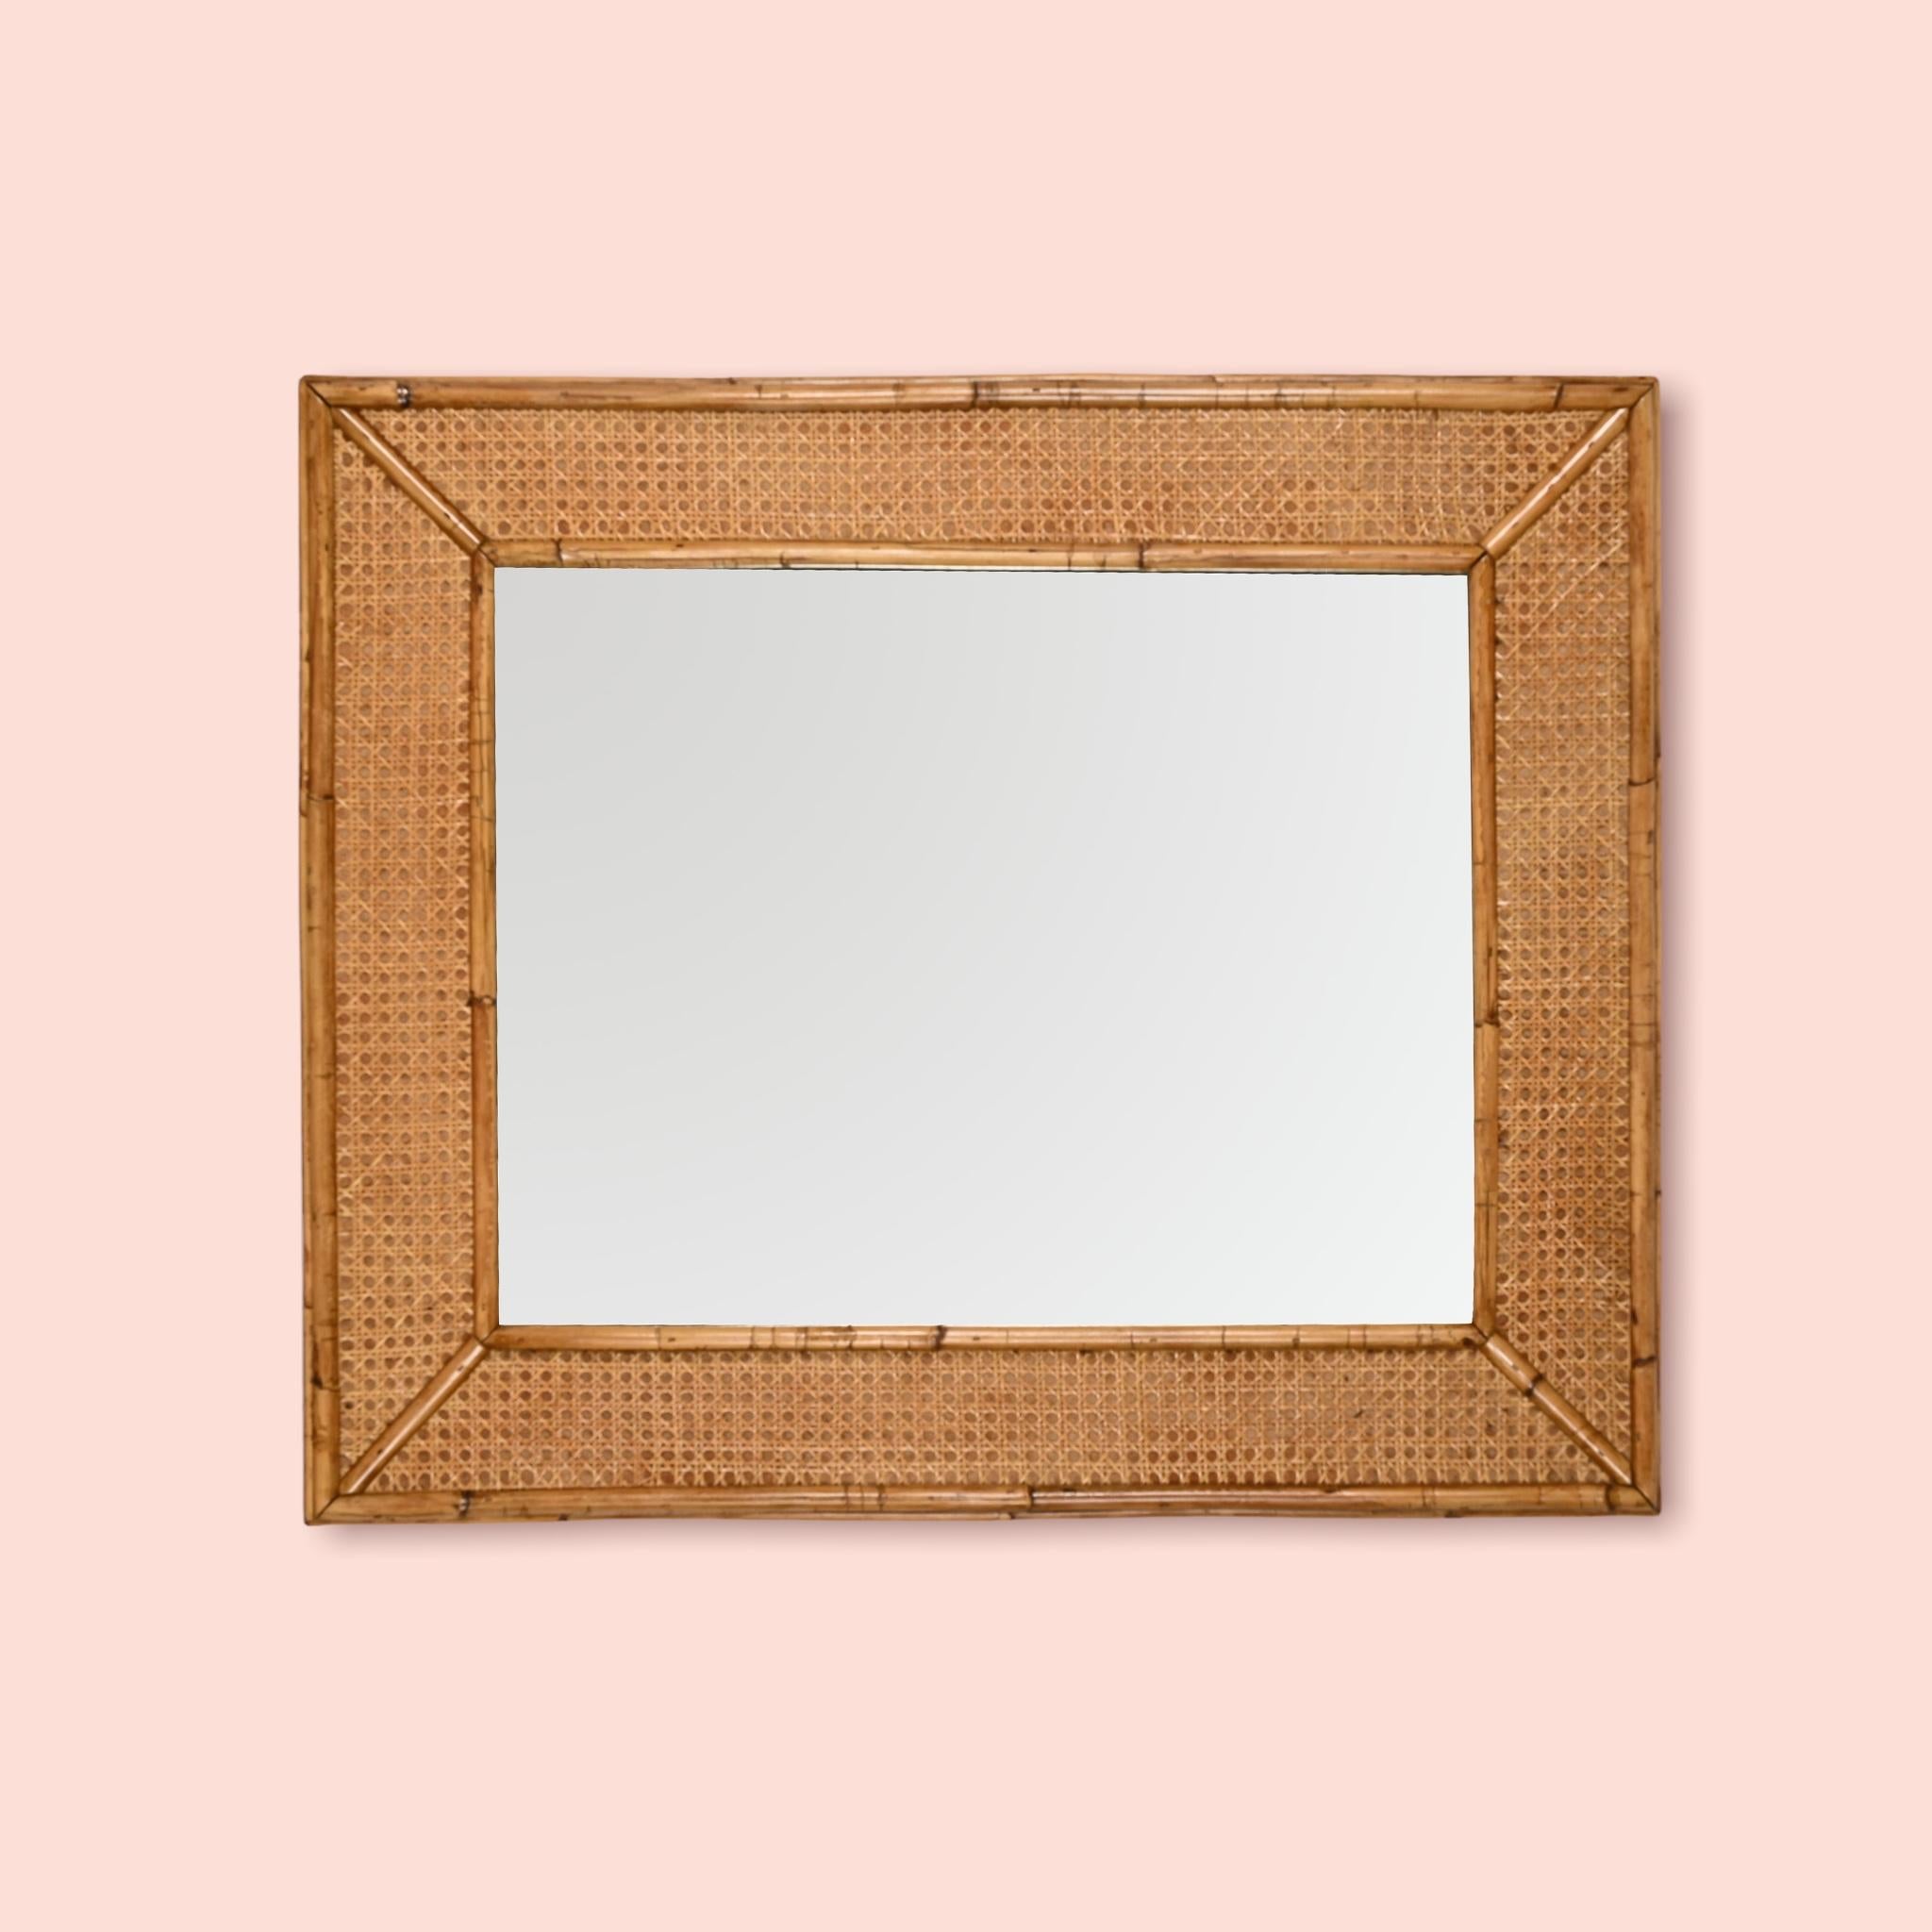 Midcentury Rectangular Italian Mirror with Bamboo and Vienna Straw Frame, 1970s For Sale 5